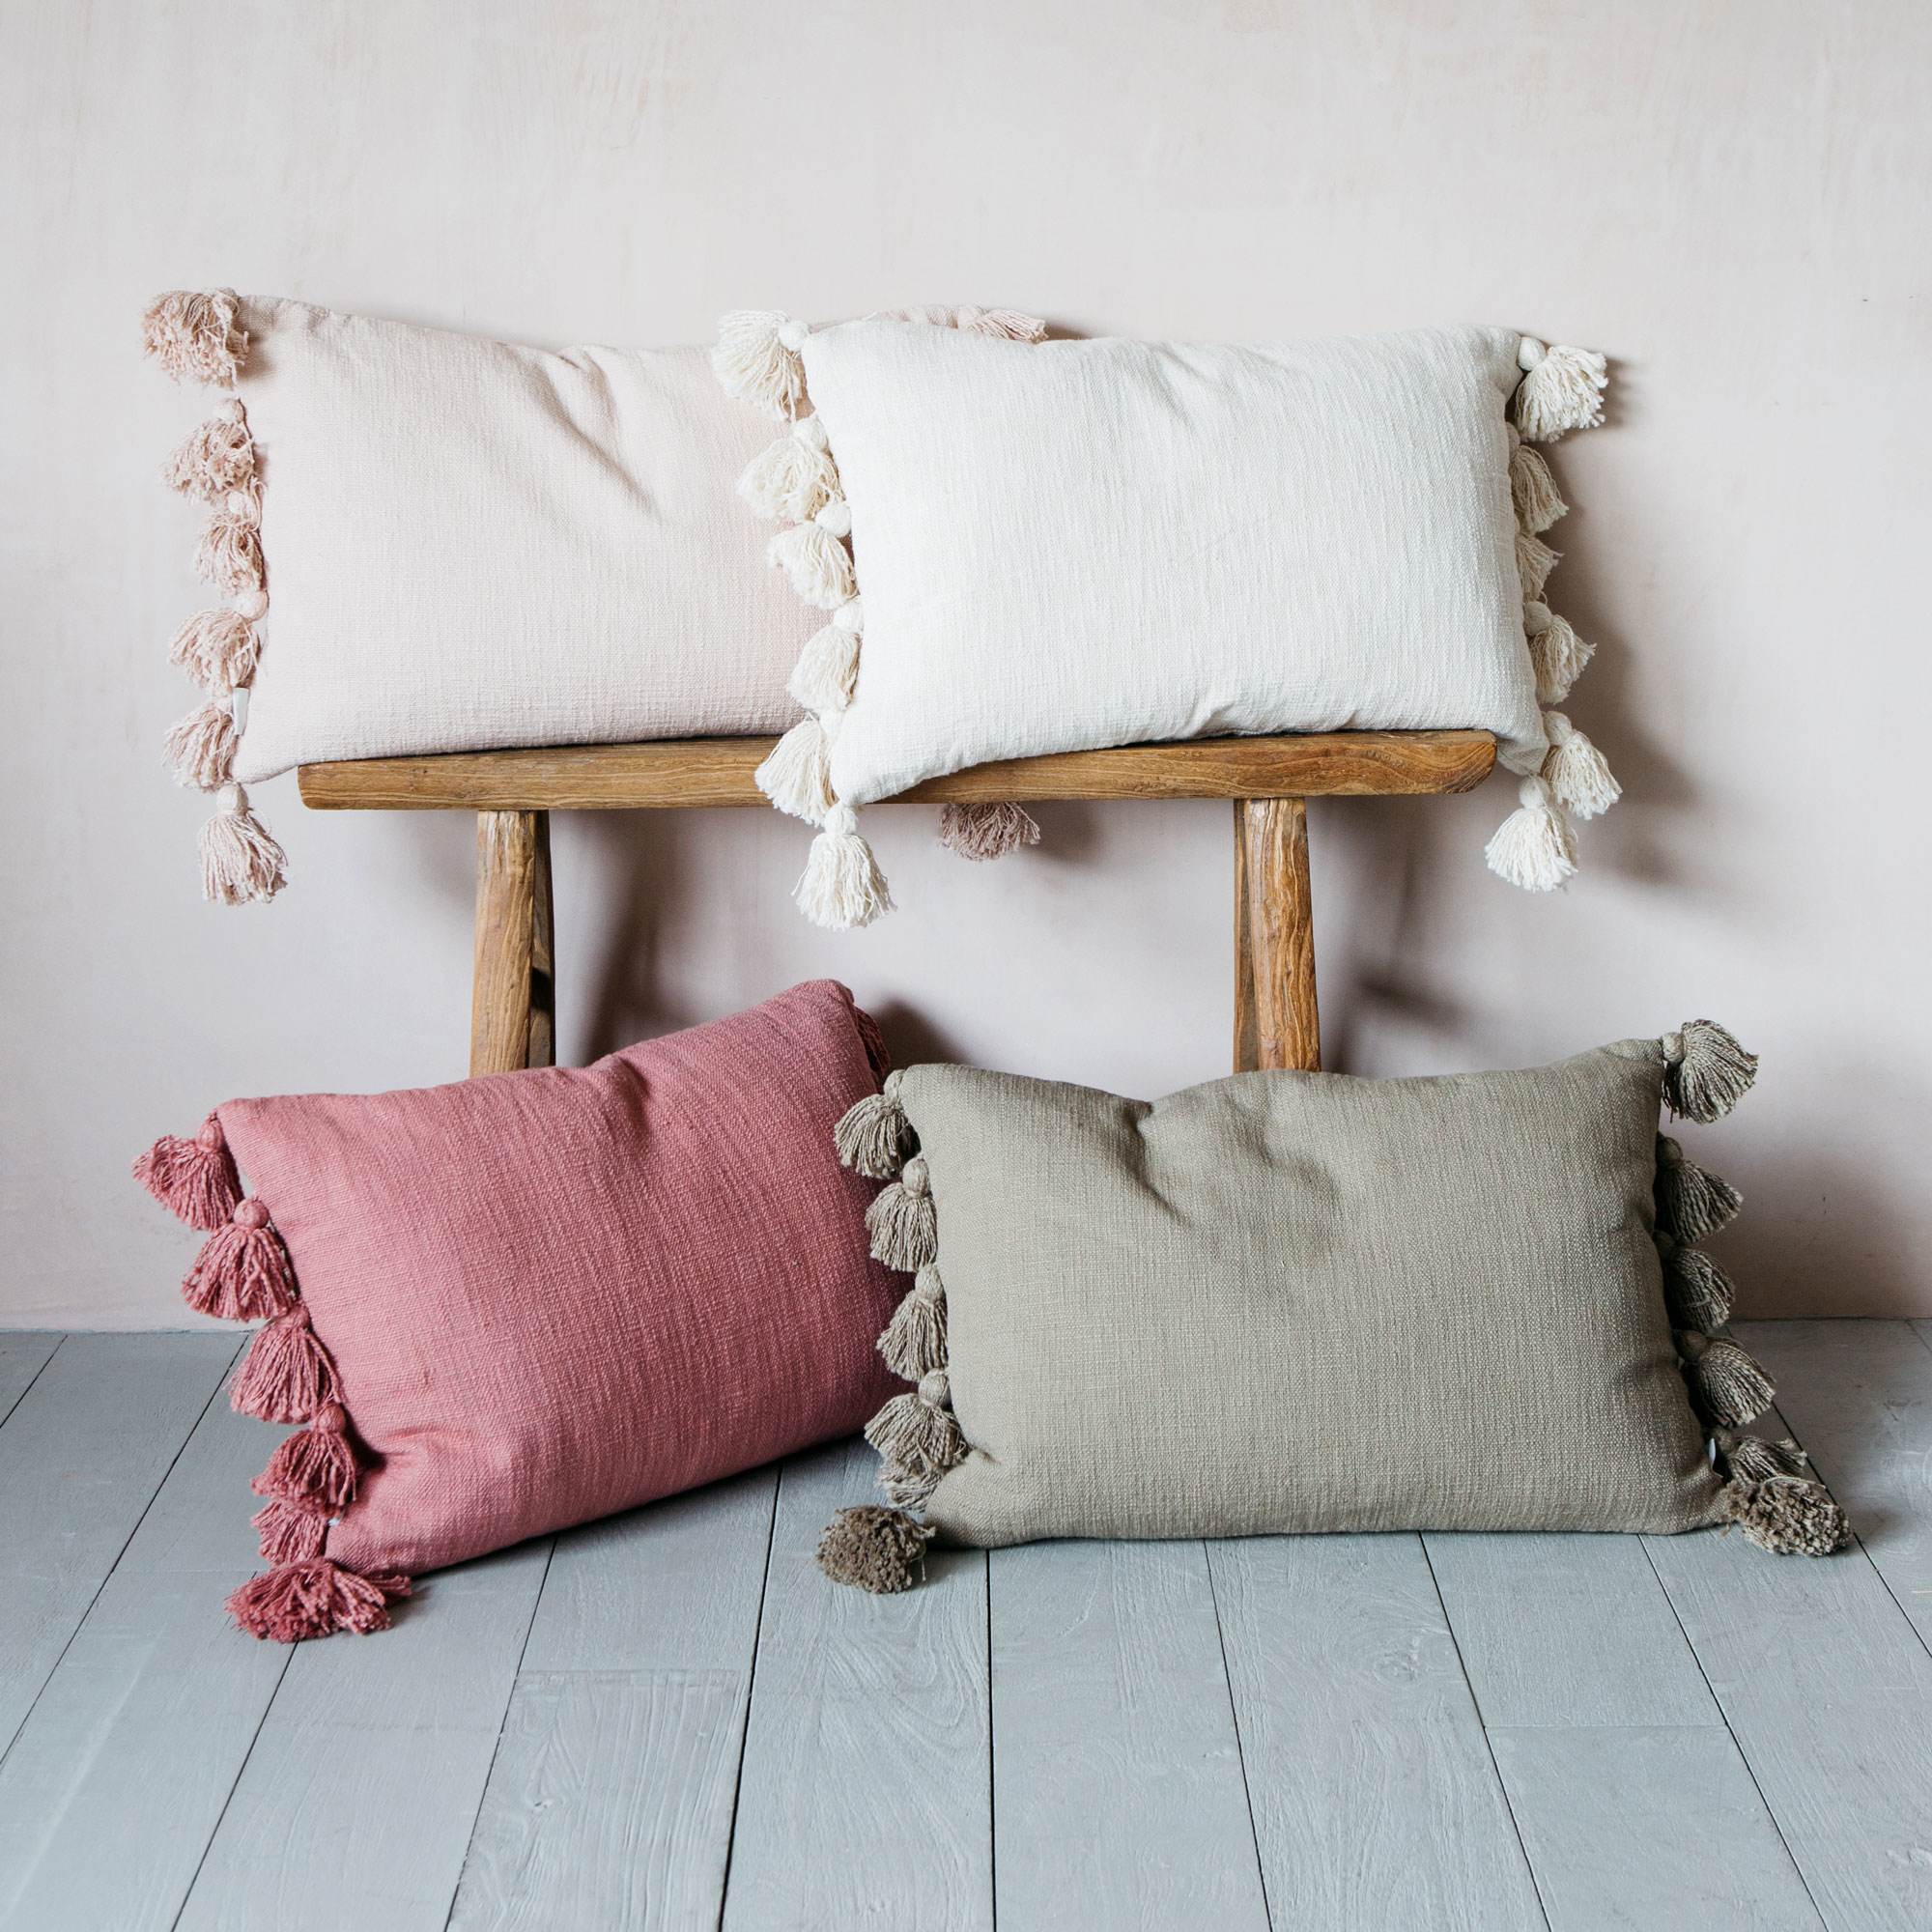 Read more about Graham and green rectangular pink tassel cushion